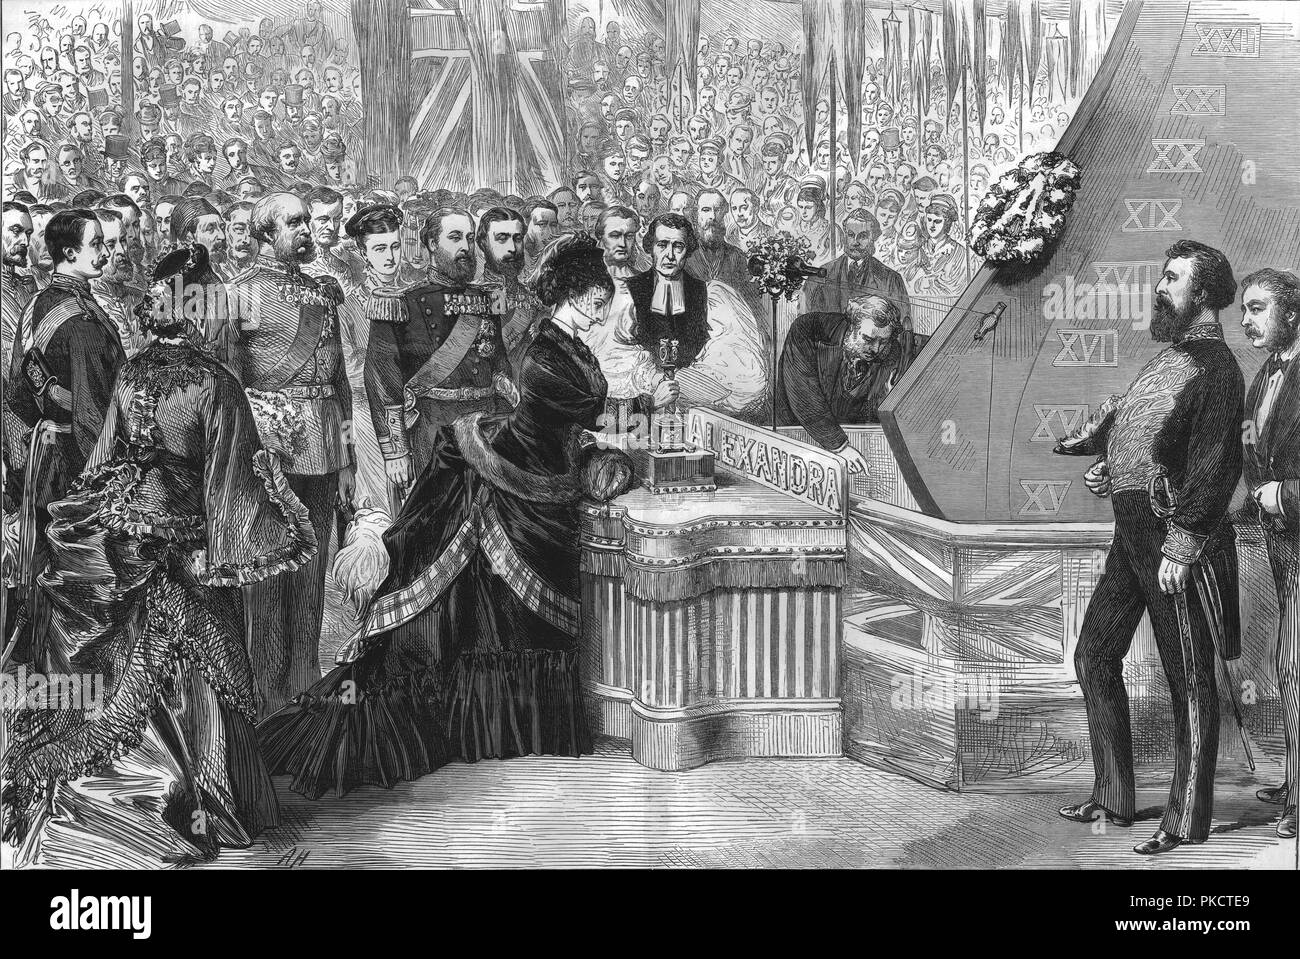 The Princess of Wales launching the new ironclad ship 'Alexandra', 1875. Artist: Unknown. Stock Photo